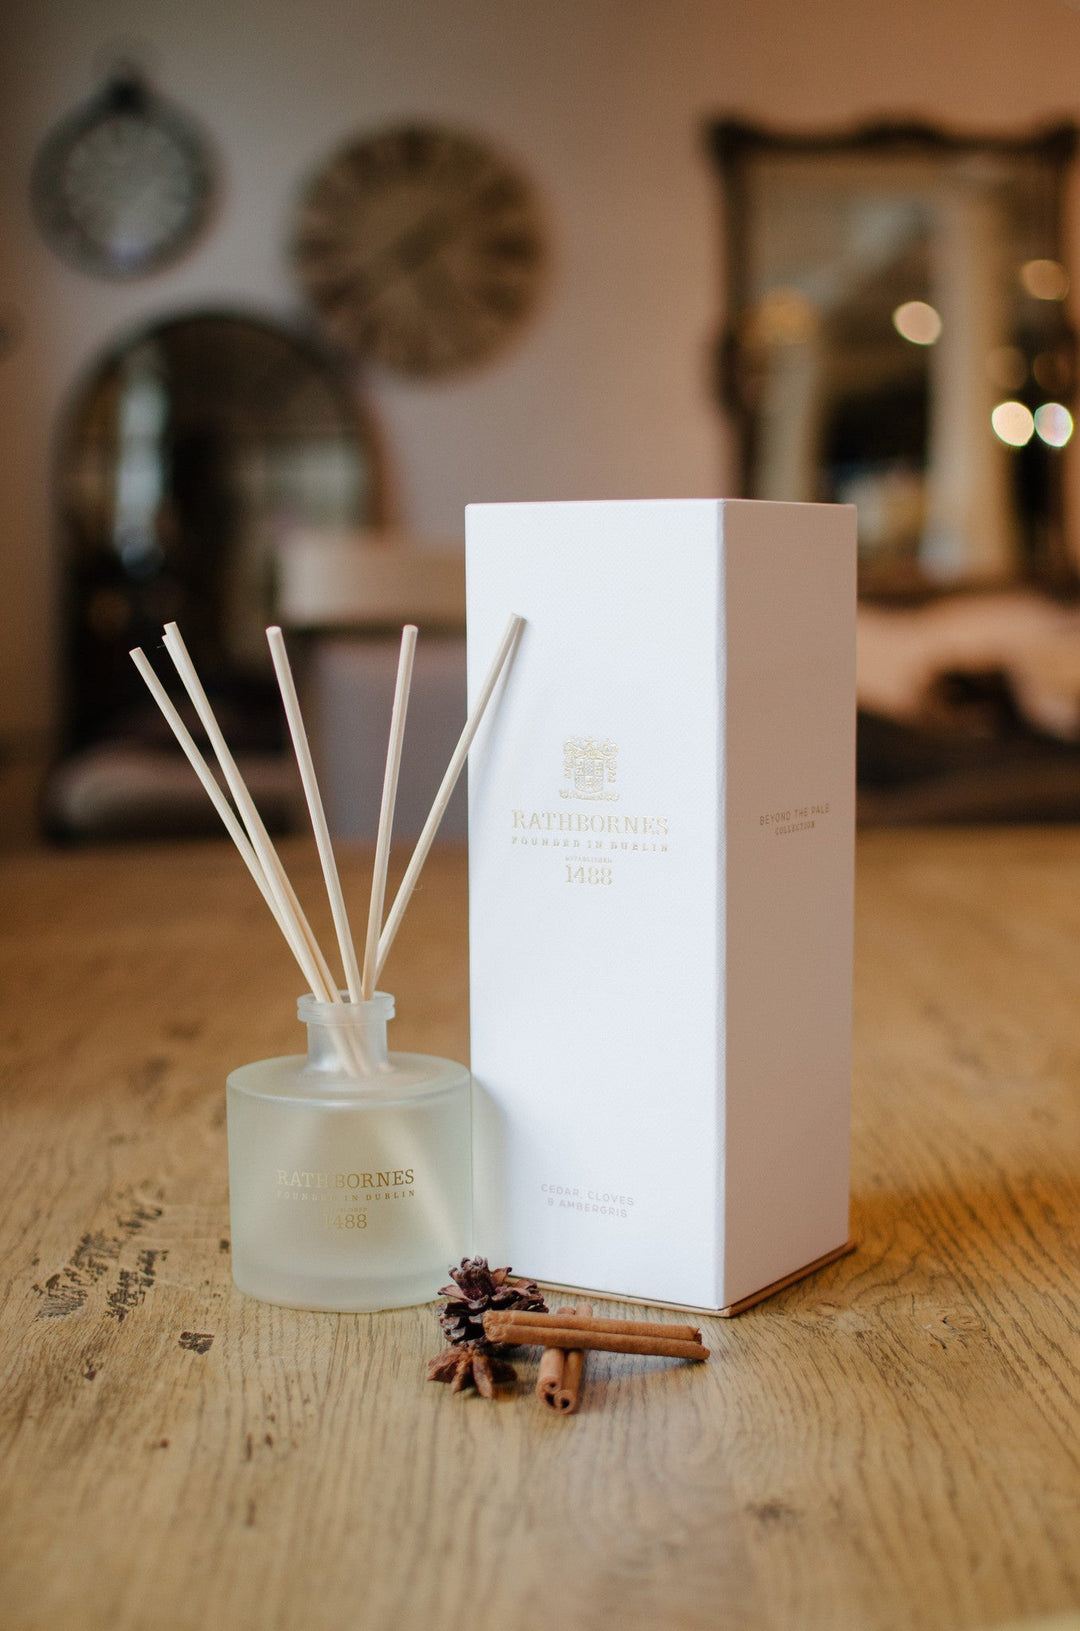 Cedar, Cloves & Amber Scented Reed Diffuser